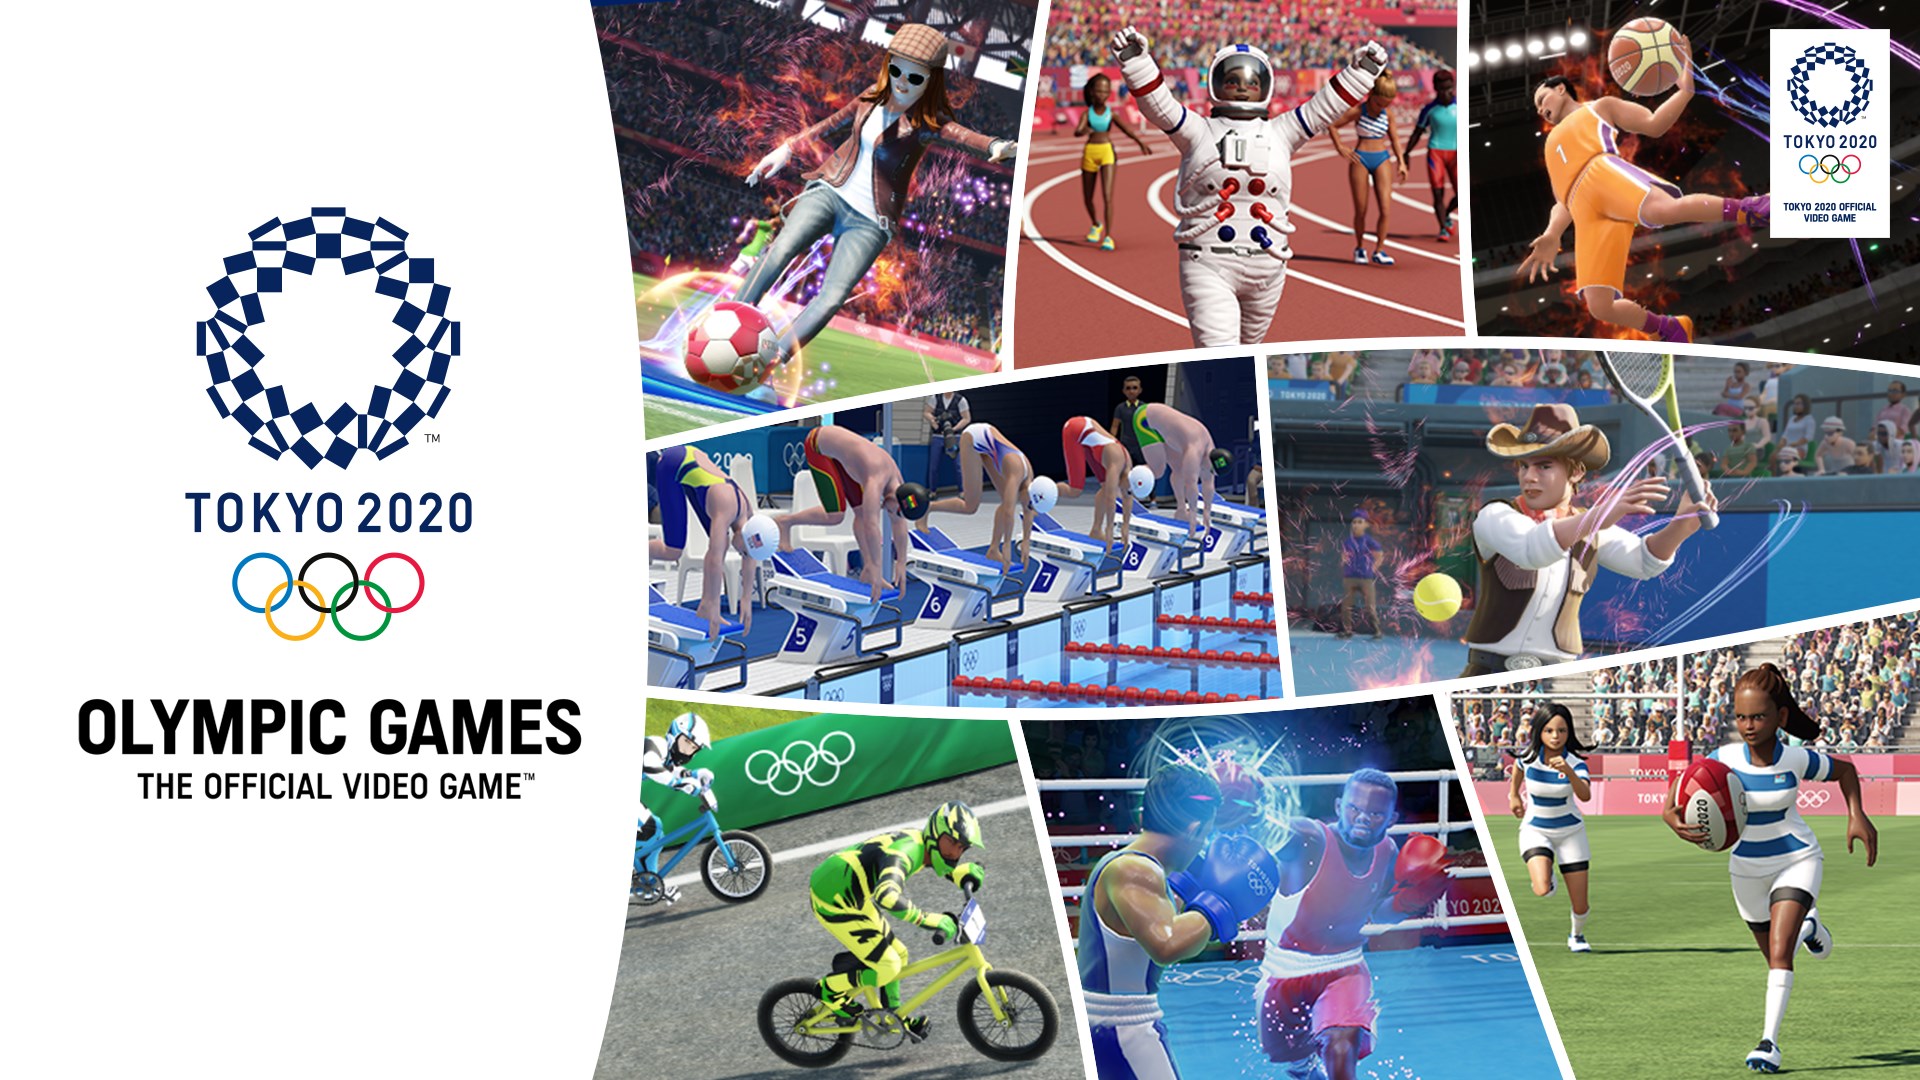 Video For Olympic Games Tokyo 2020 – The Official Video Game Is Now Available For Digital Pre-order And Pre-download On Xbox One And Xbox Series X|S